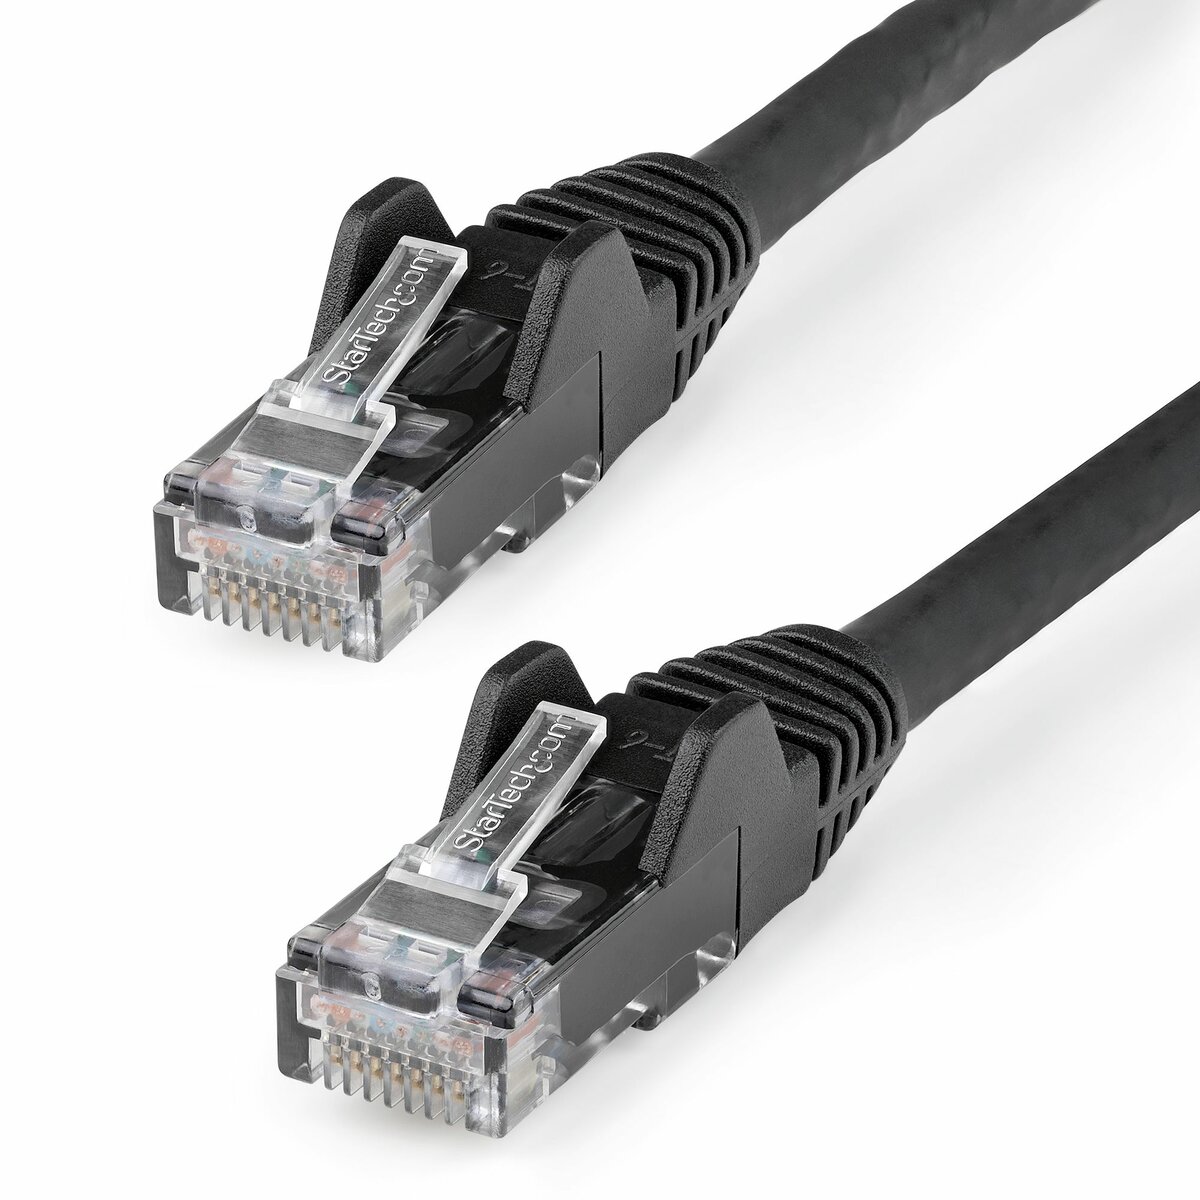 New 2 Pack Lot 2ft Ethernet Network LAN Router Patch Cable Cord Wire Green Fittings and Adapters FOU-0193DA by InnaBest